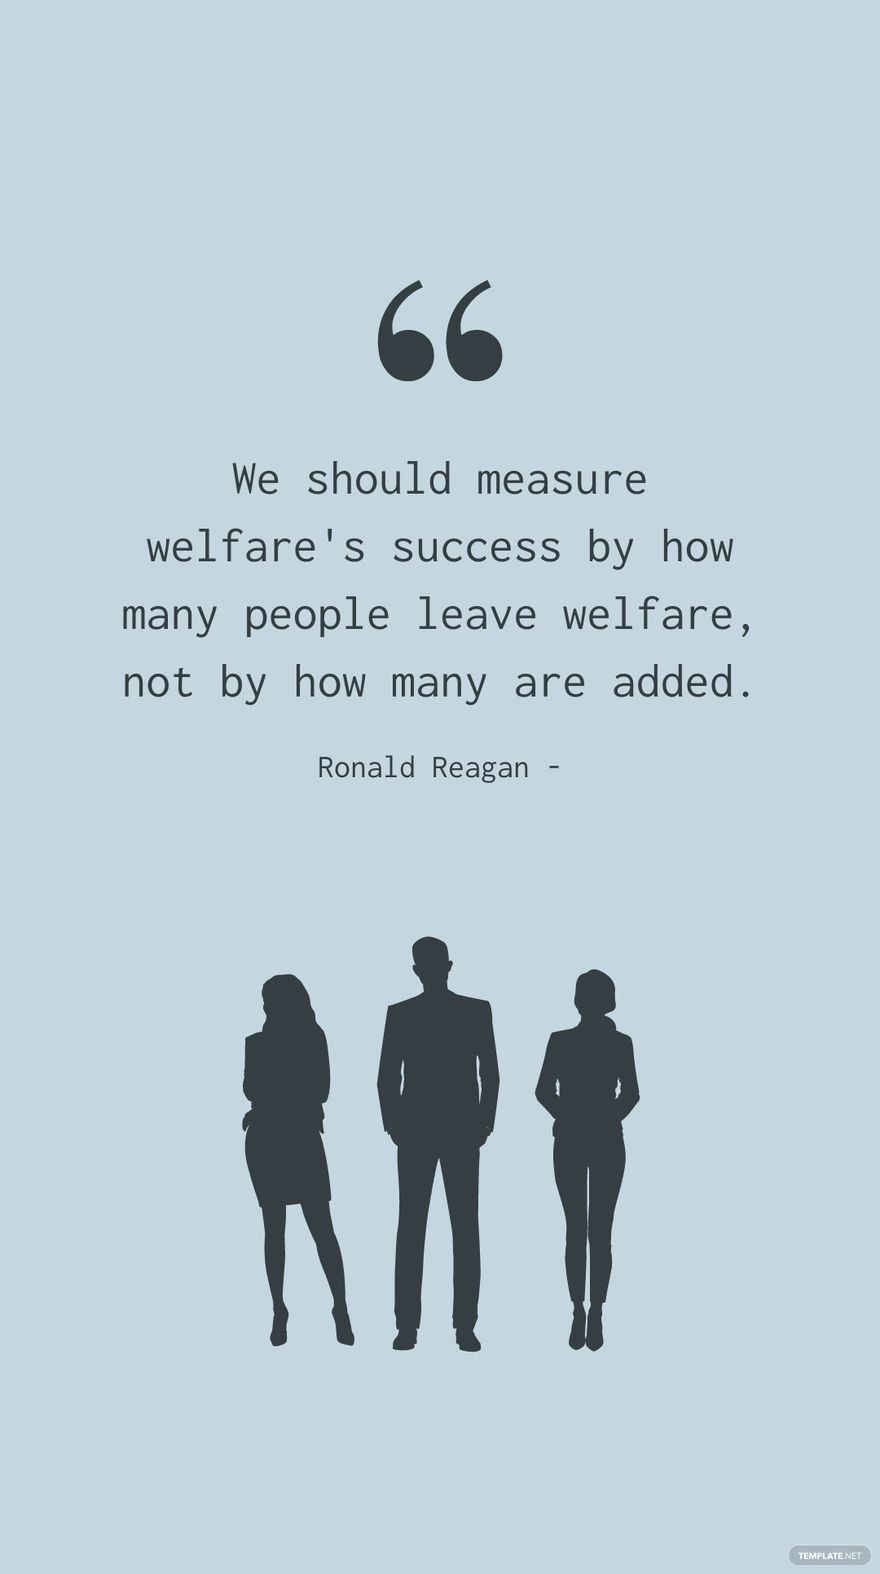 Ronald Reagan - We should measure welfare's success by how many people leave welfare, not by how many are added.